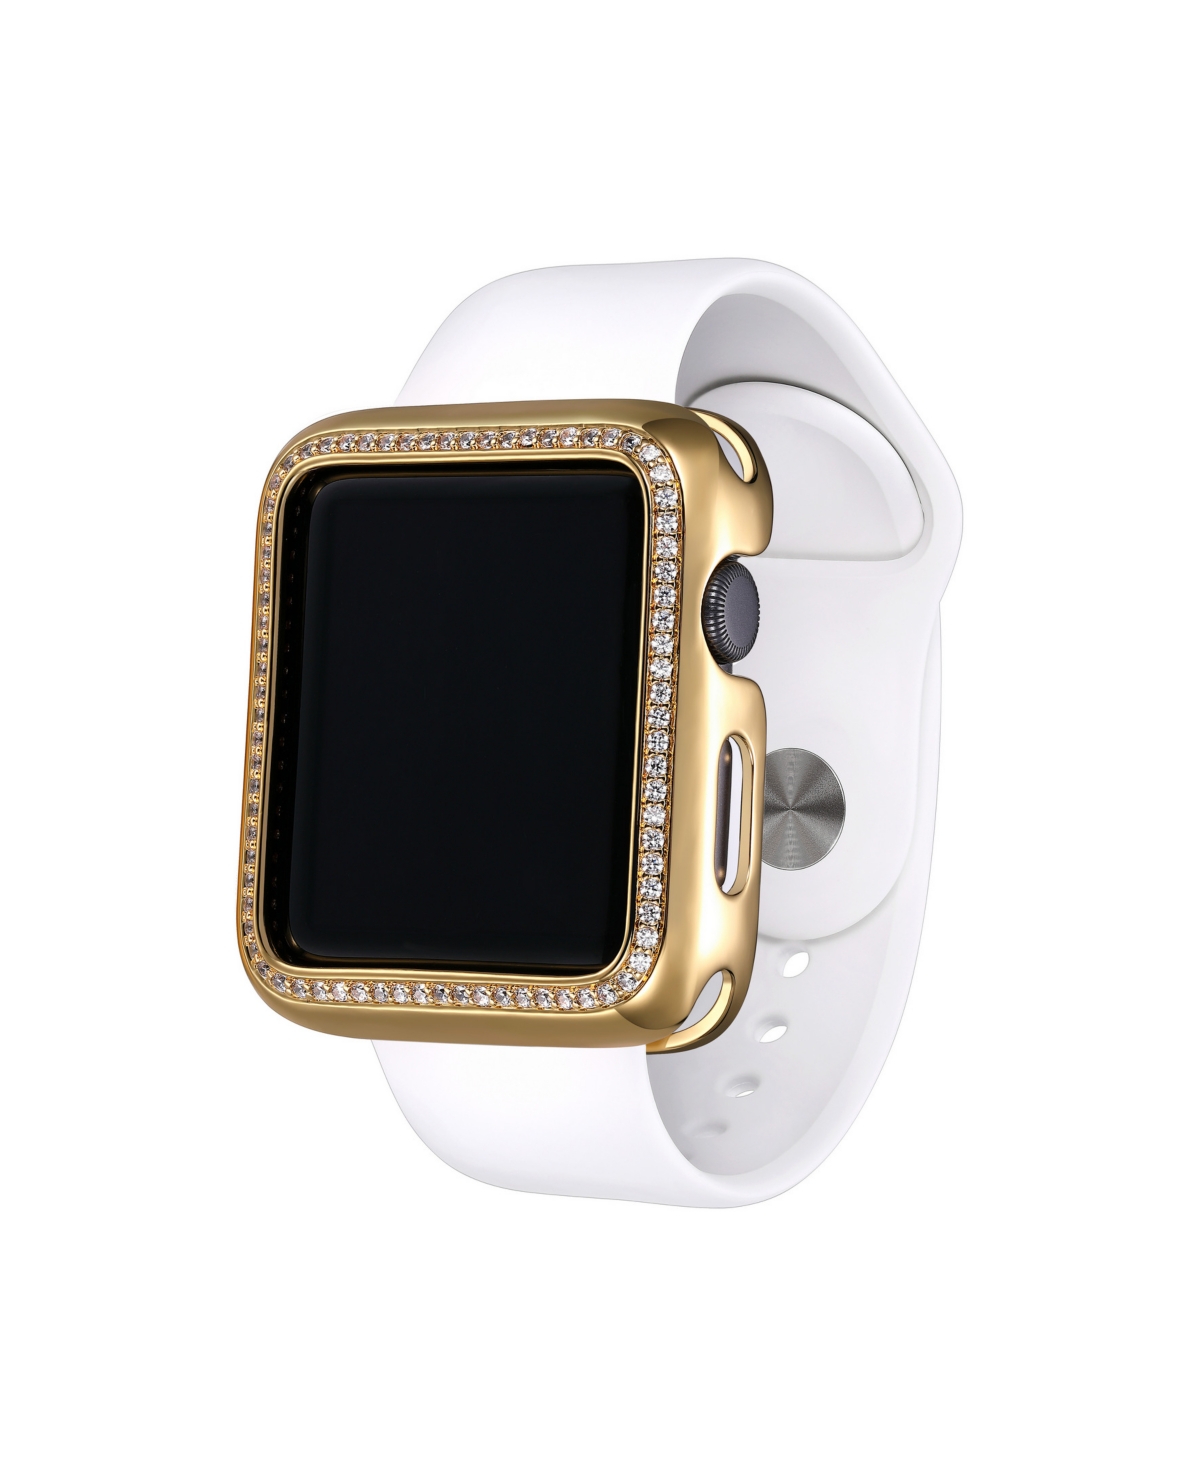 Halo Apple Watch Case, Series 1-3, 42mm - Gold-Tone